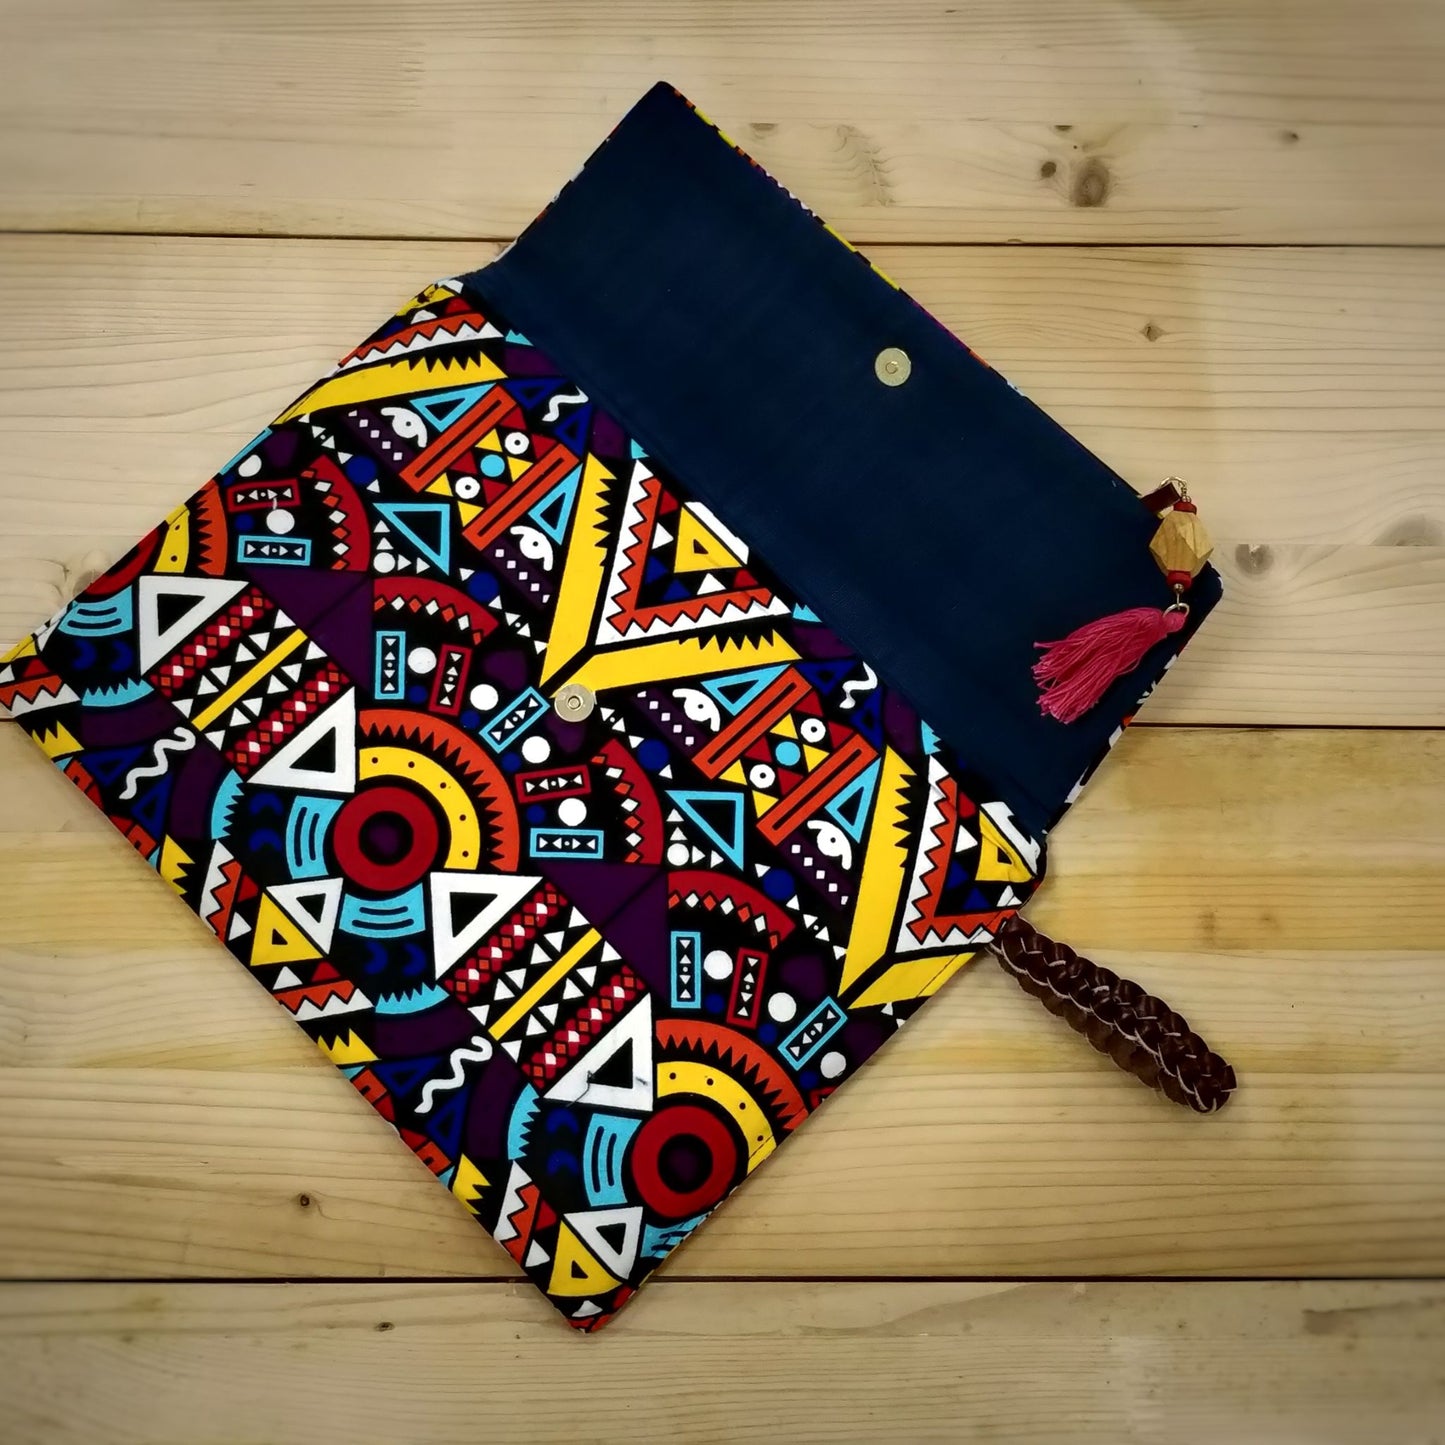 Inside: Fabric-Bound Tablet Case | Handmade and Fair Trade - iPad case made from vitenge fabric